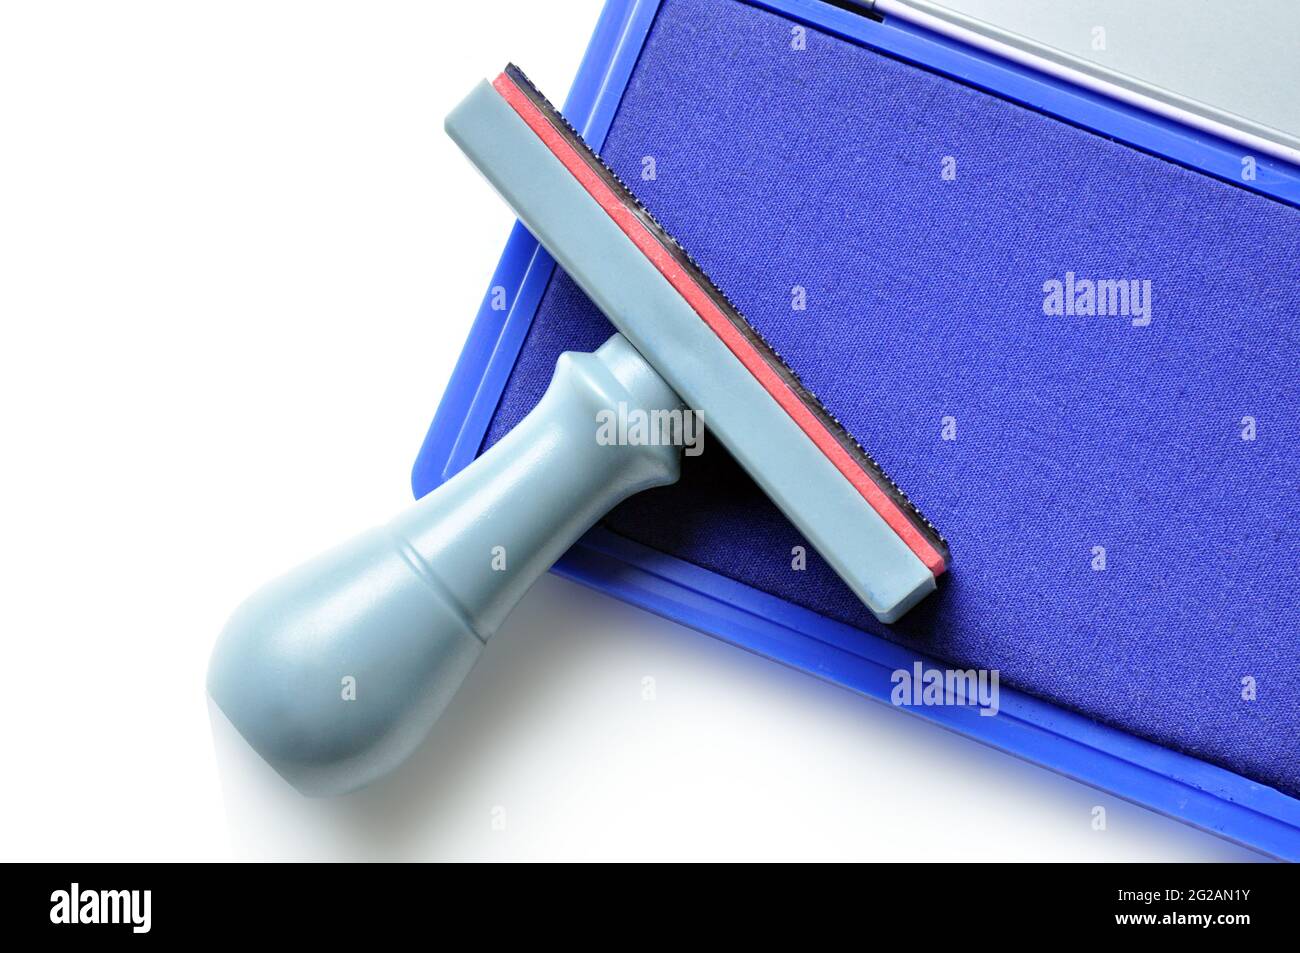 Rubber stamp on blue ink pad Stock Photo